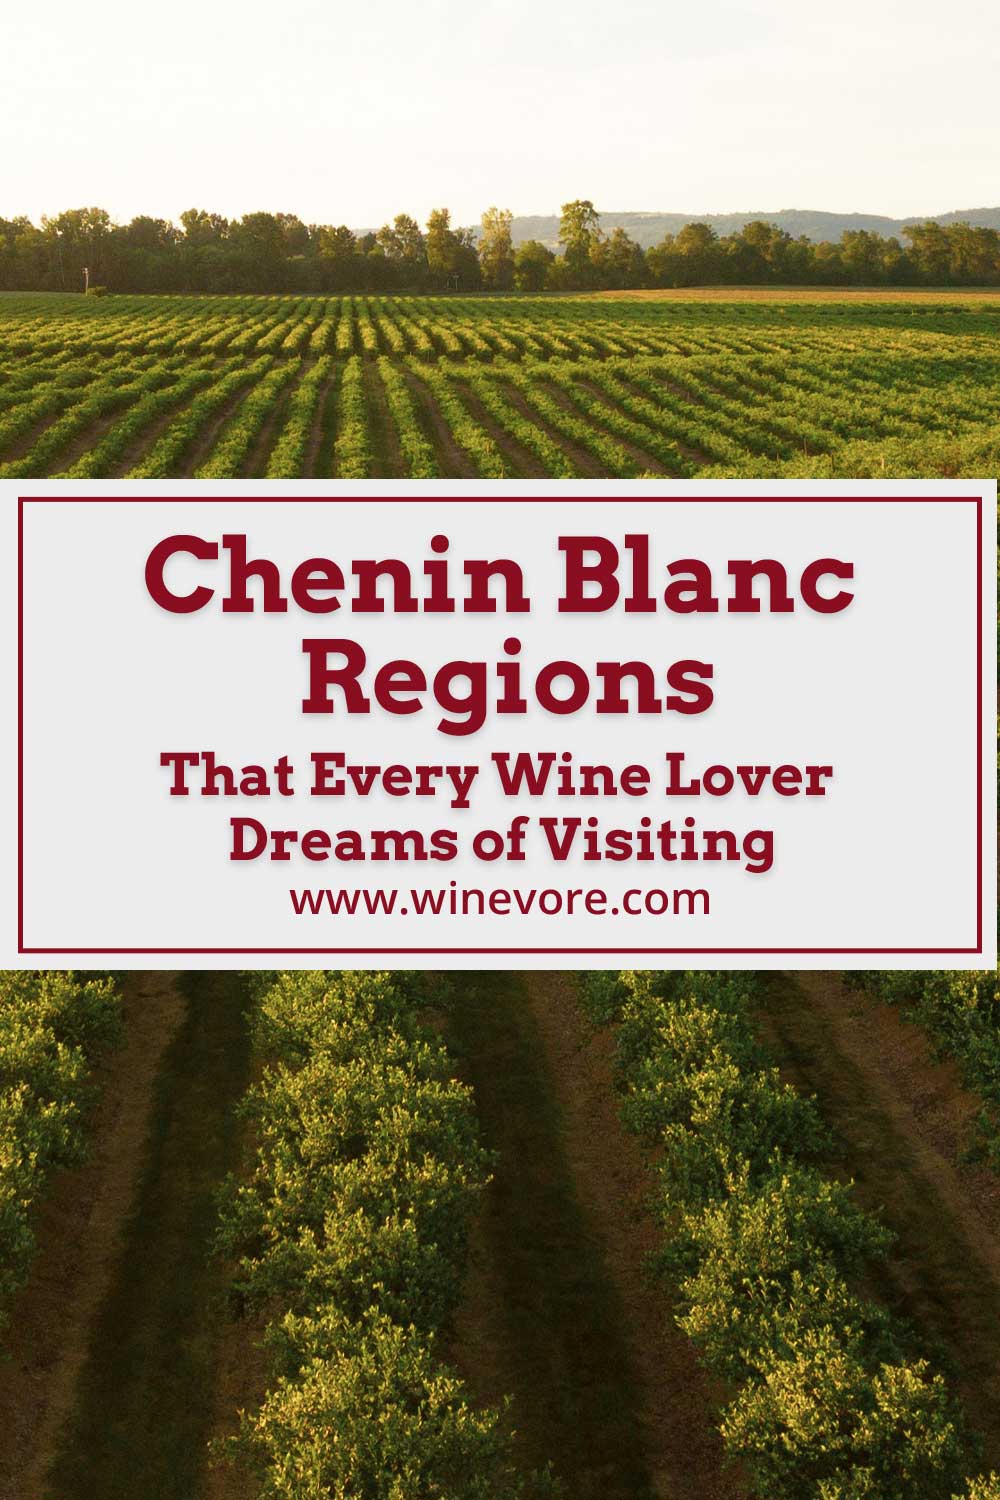 A wide vineyard and bright sunlight fall on it - Chenin Blanc Regions That Every Wine Lover Dreams of Visiting.